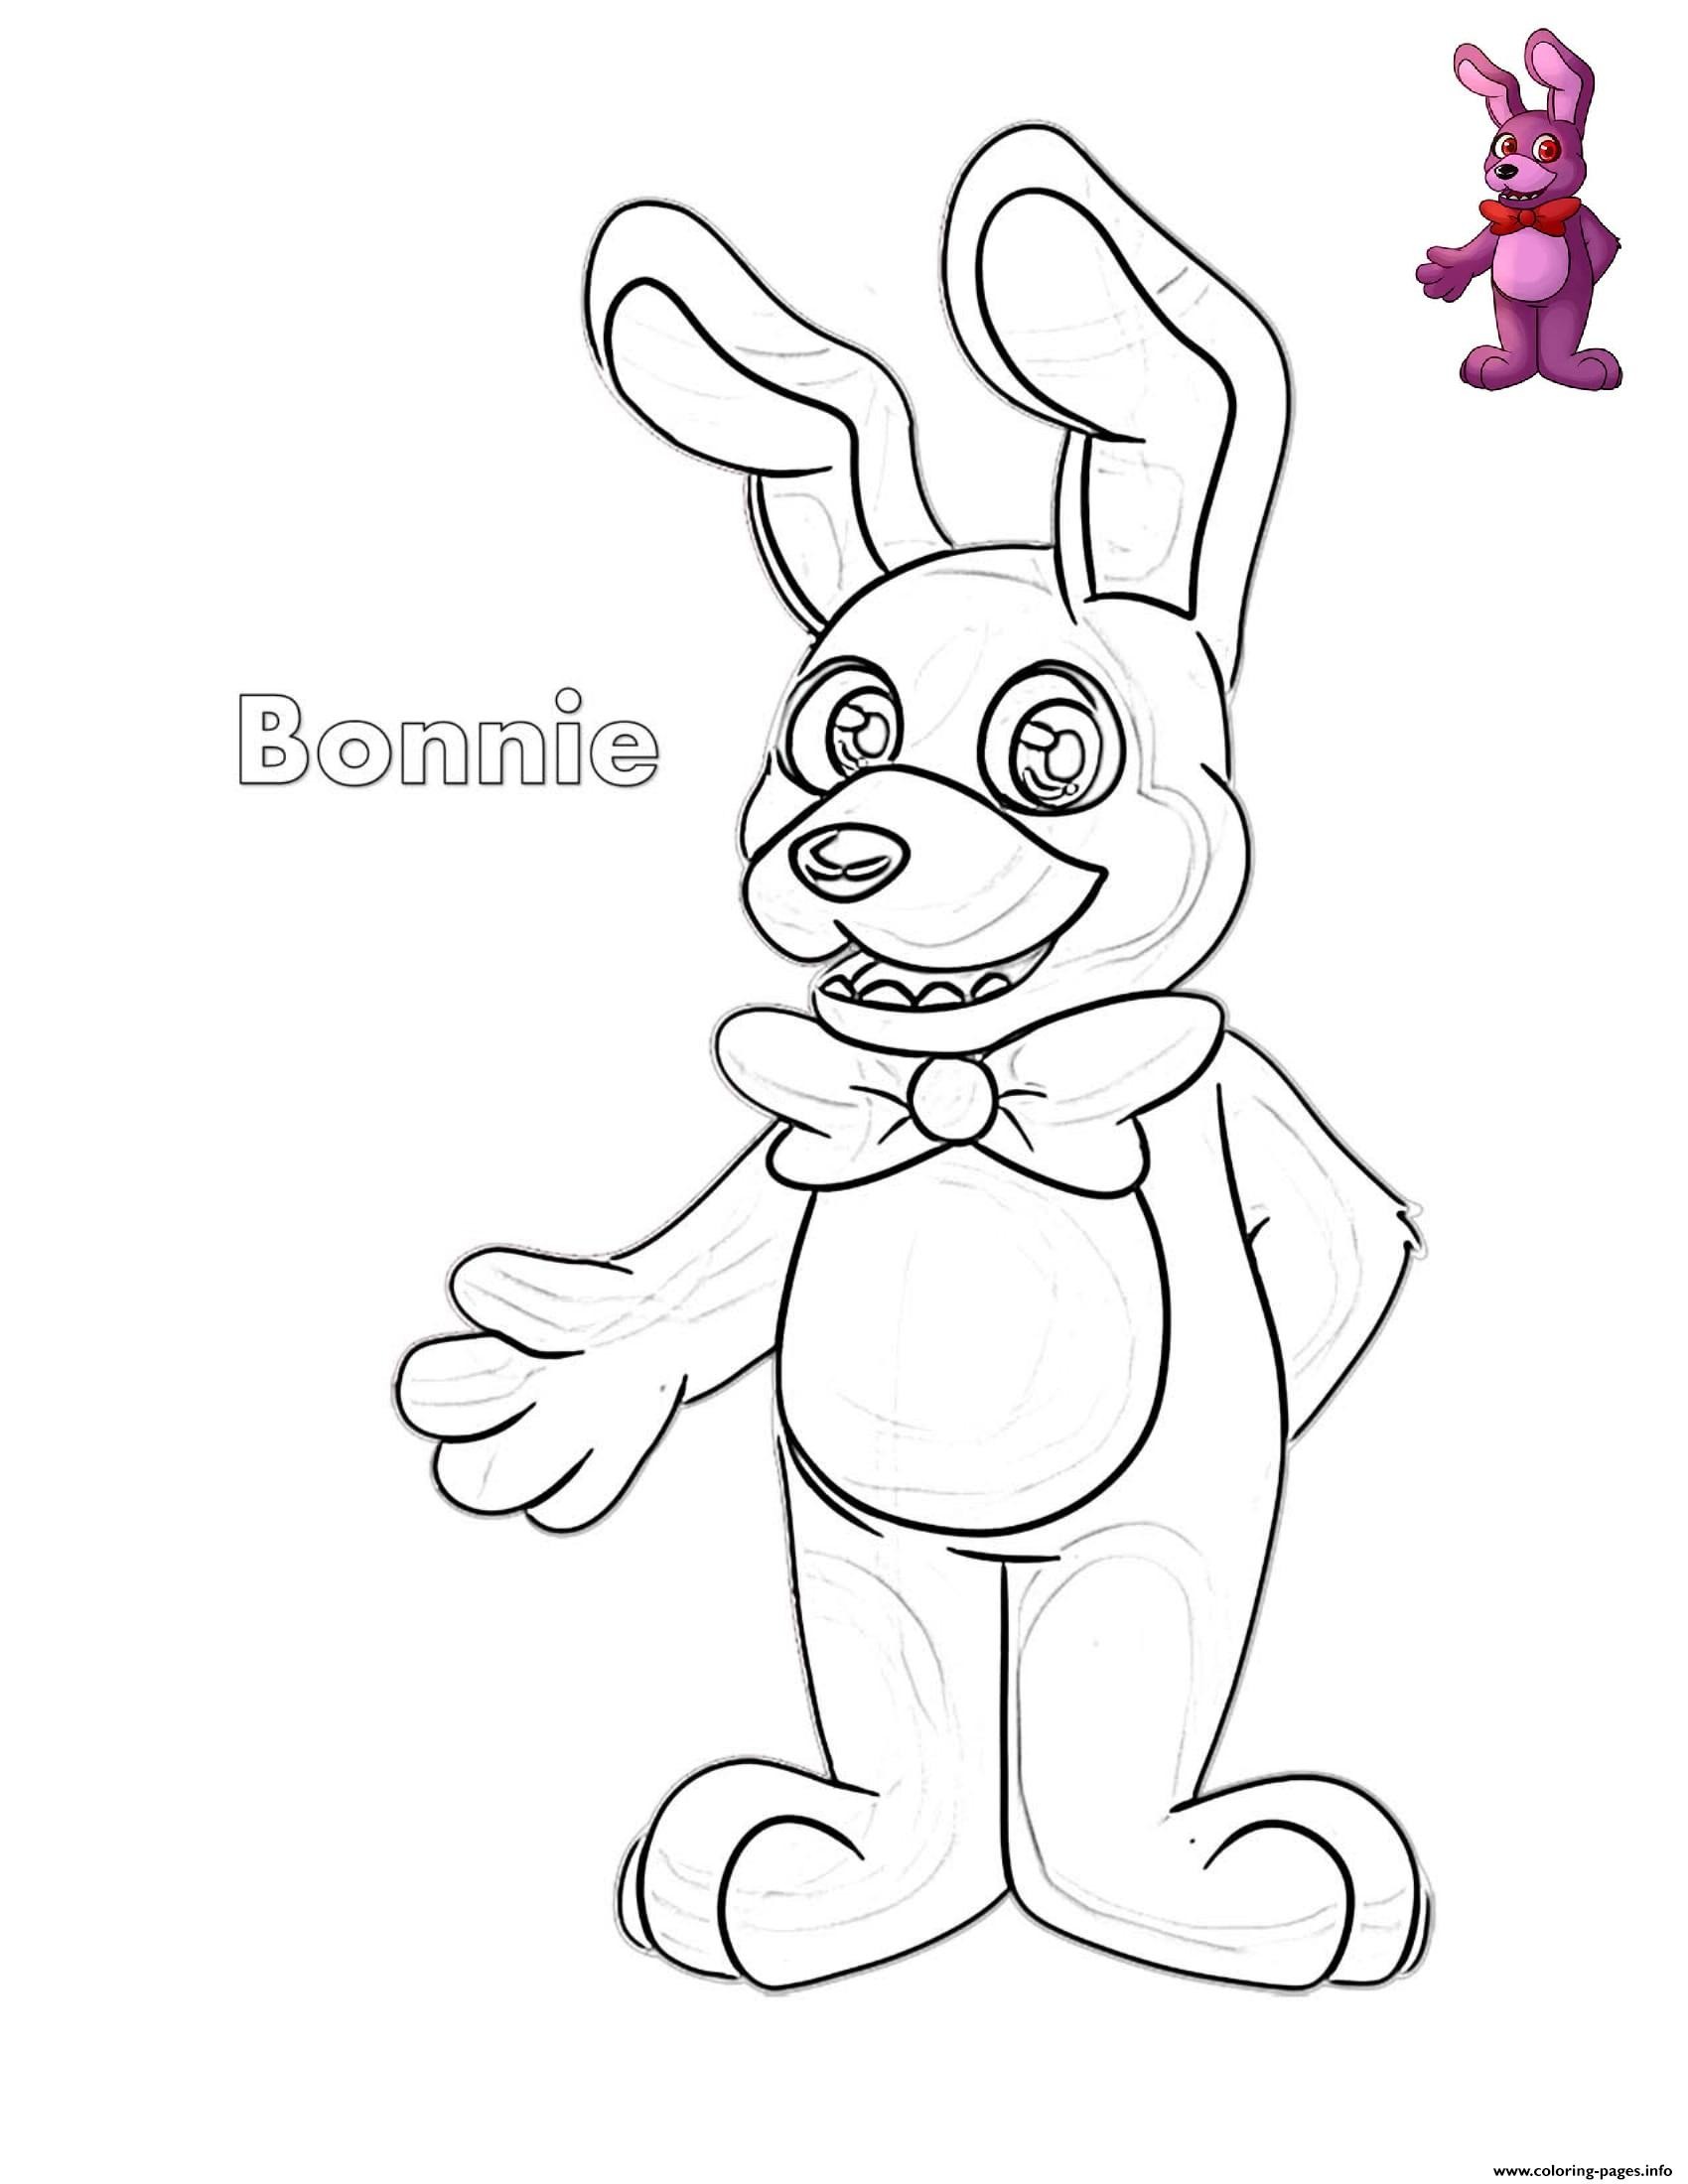 1700x2200 Fnaf Coloring Pages New Bonnie From Fnaf Coloring Pages.